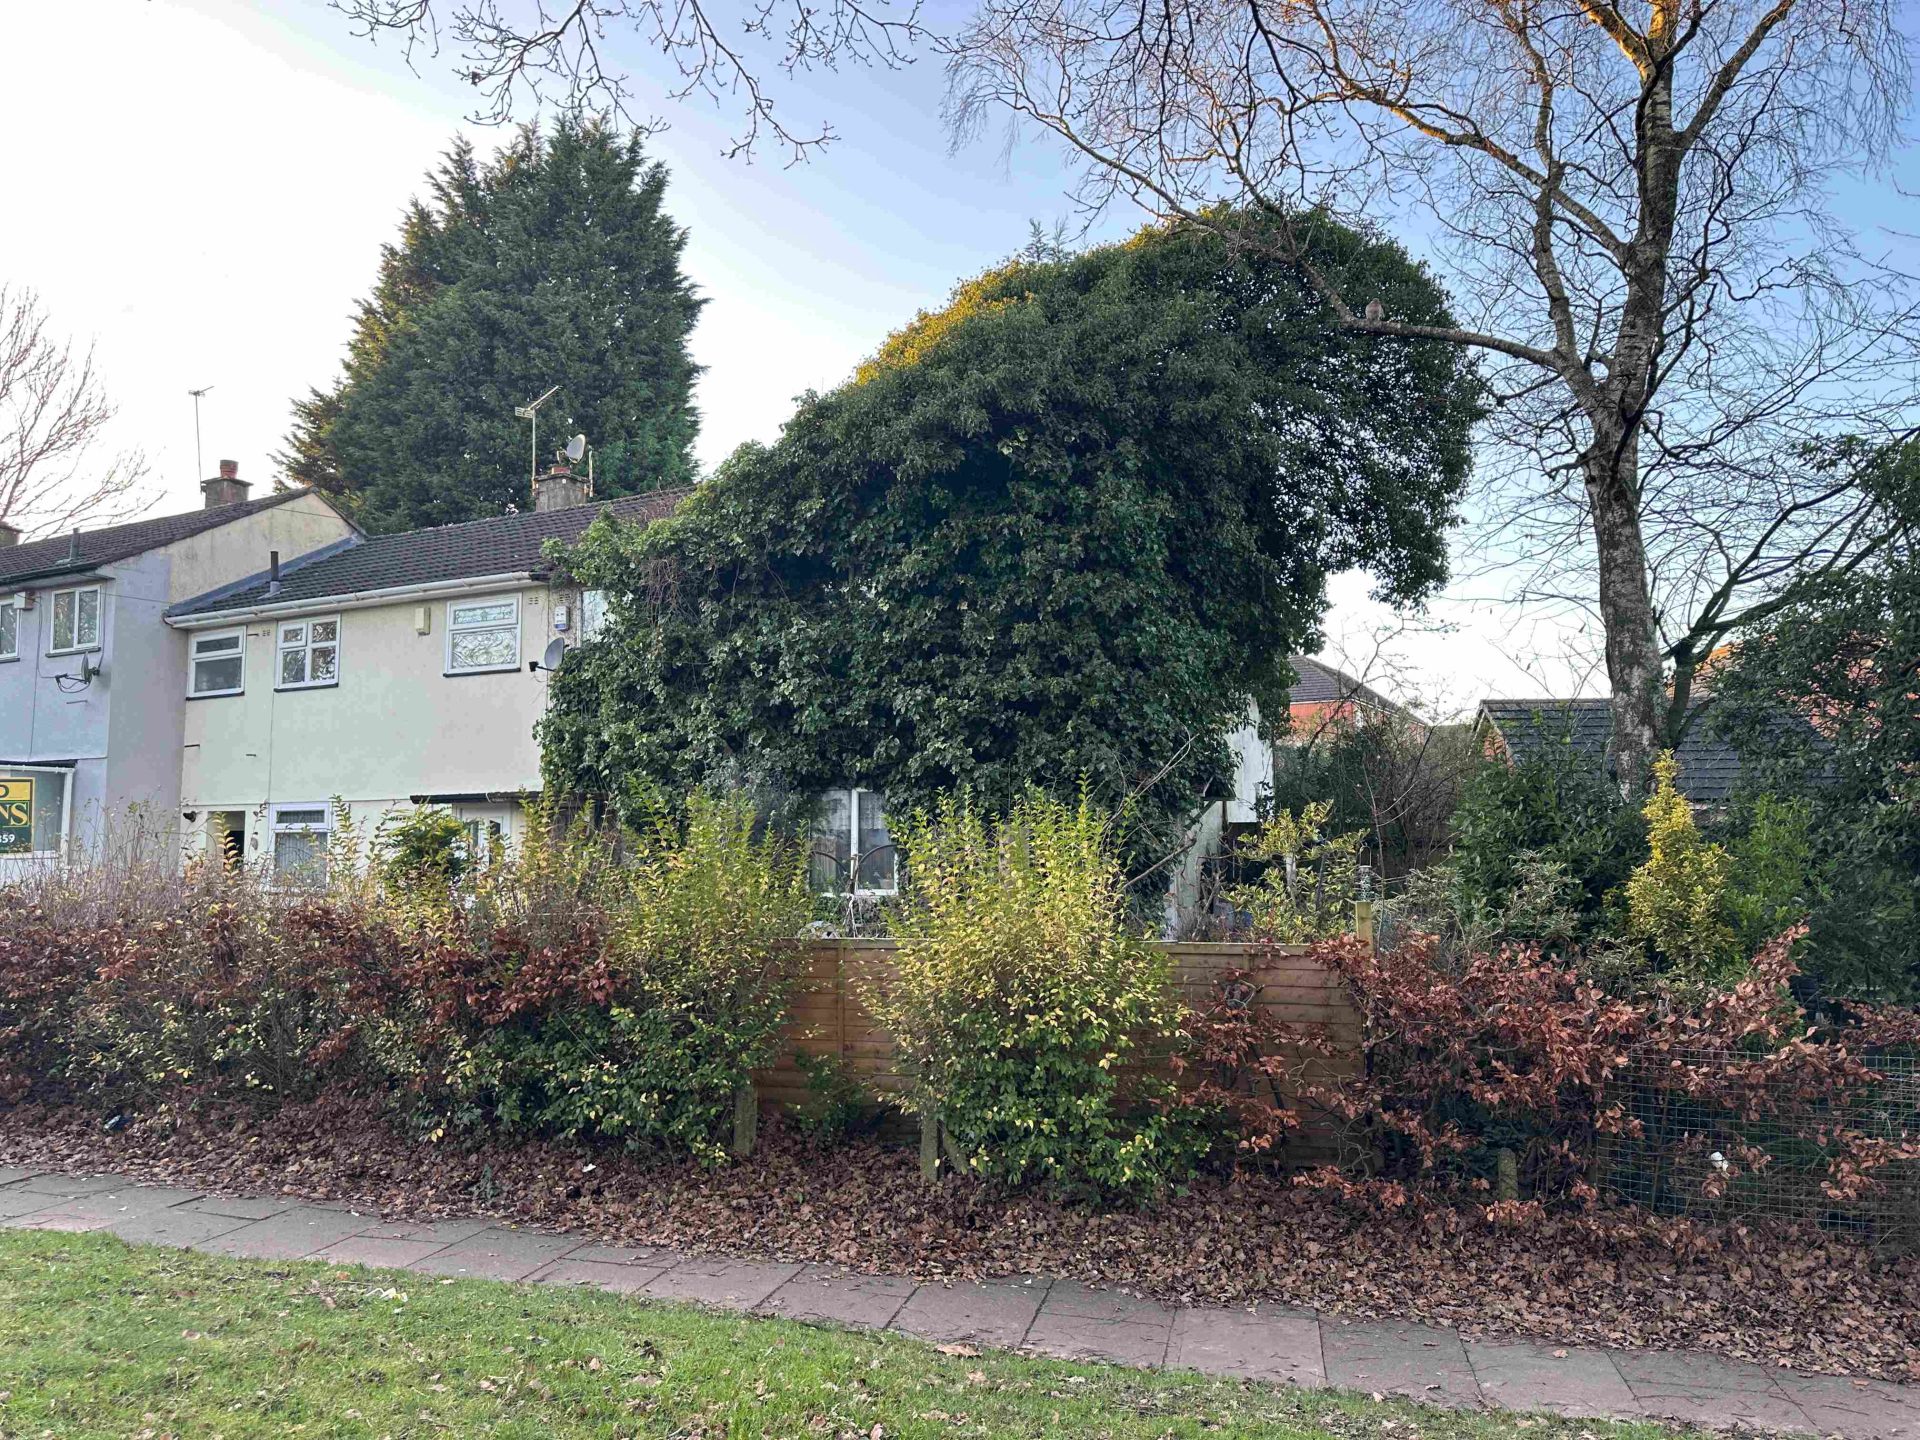 BWA 95 Walkers Heath Road Overgrown trees hide family home with starting price of just £25k in Bond Wolfe auction